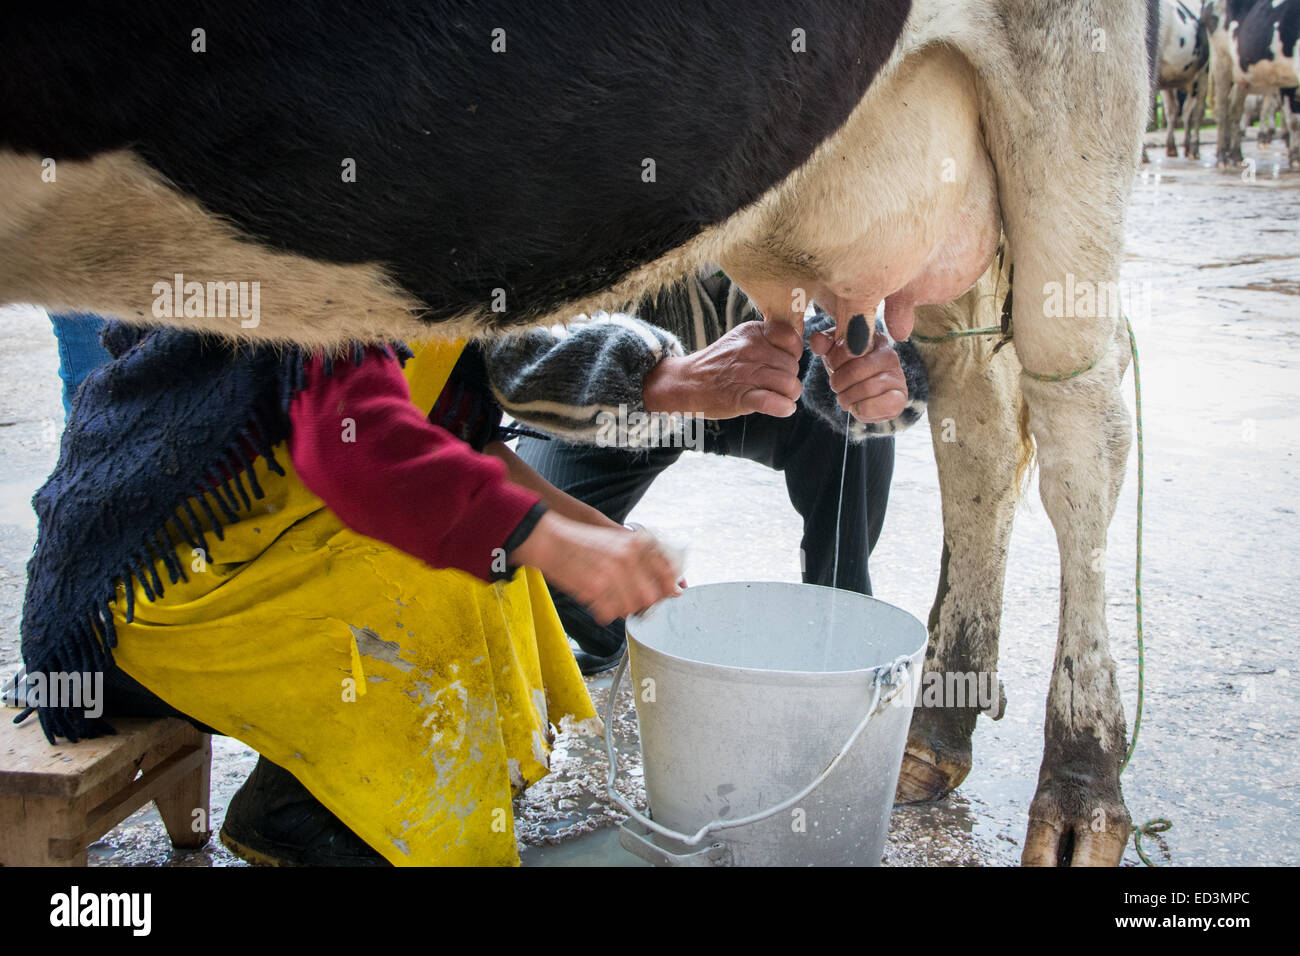 Learning to Milk a Cow by Hand Stock Photo